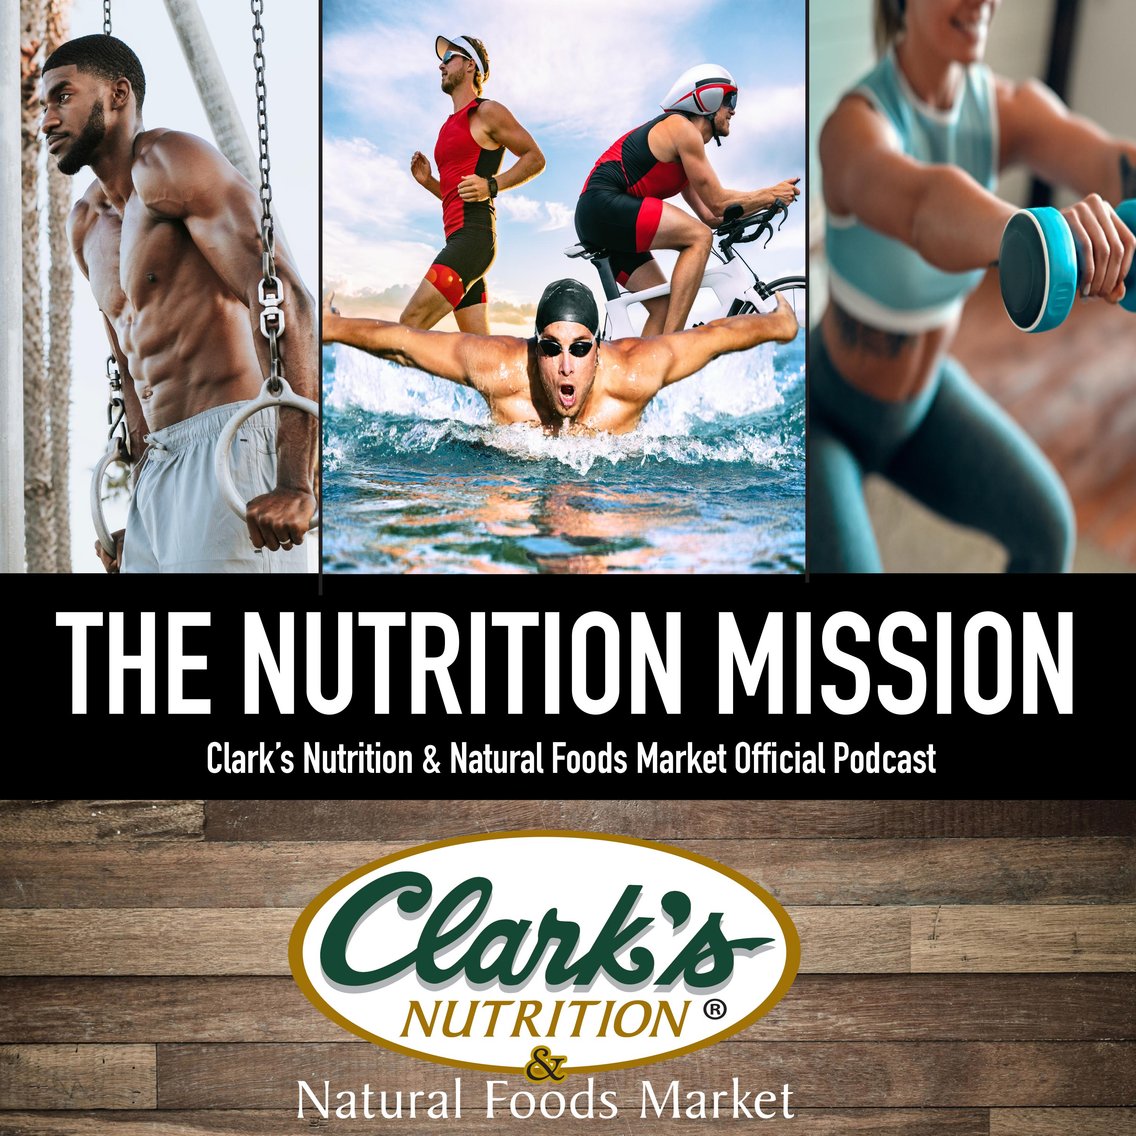 The Nutrition Mission - Clark's Nutrition and Natural Food Market Podcast - immagine di copertina
